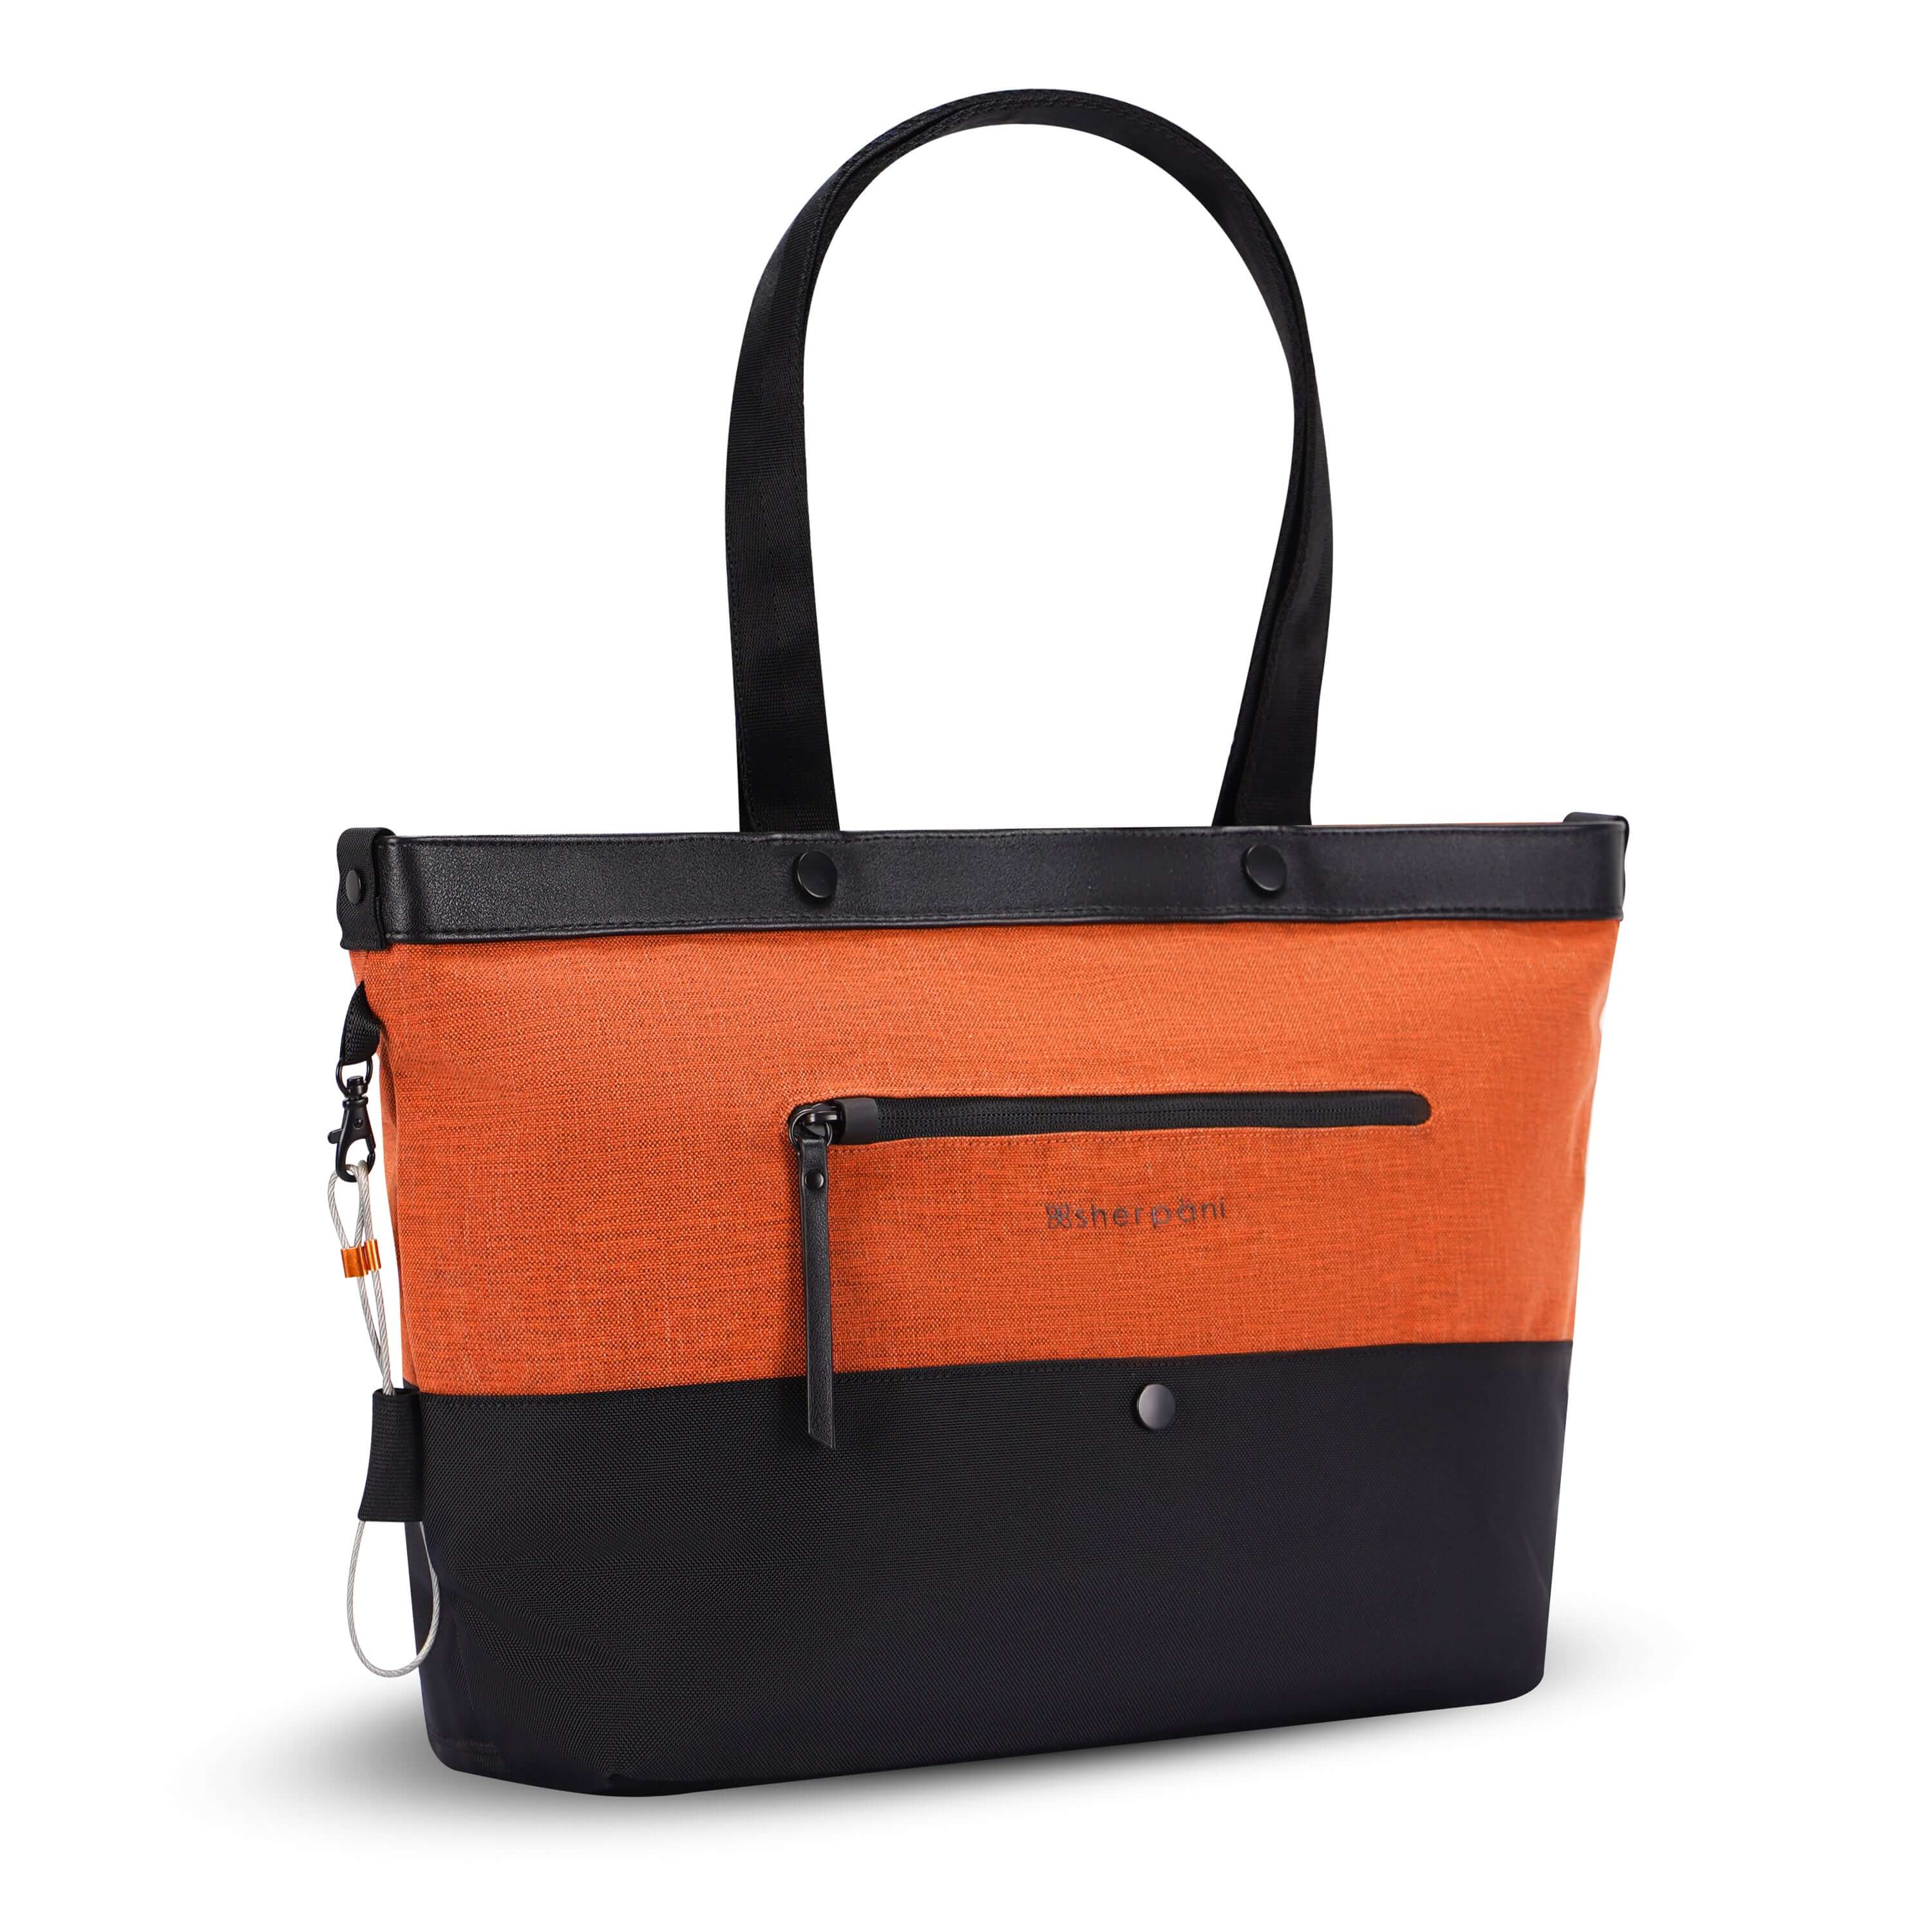 Angled front view of Sherpani&#39;s Anti-Theft tote, the Cali AT in Copper, with vegan leather accents in black. There is an external compartment on the front of the bag with a locking zipper. A chair loop lock is clipped to the side of the bag and is held in place by an elastic tab.